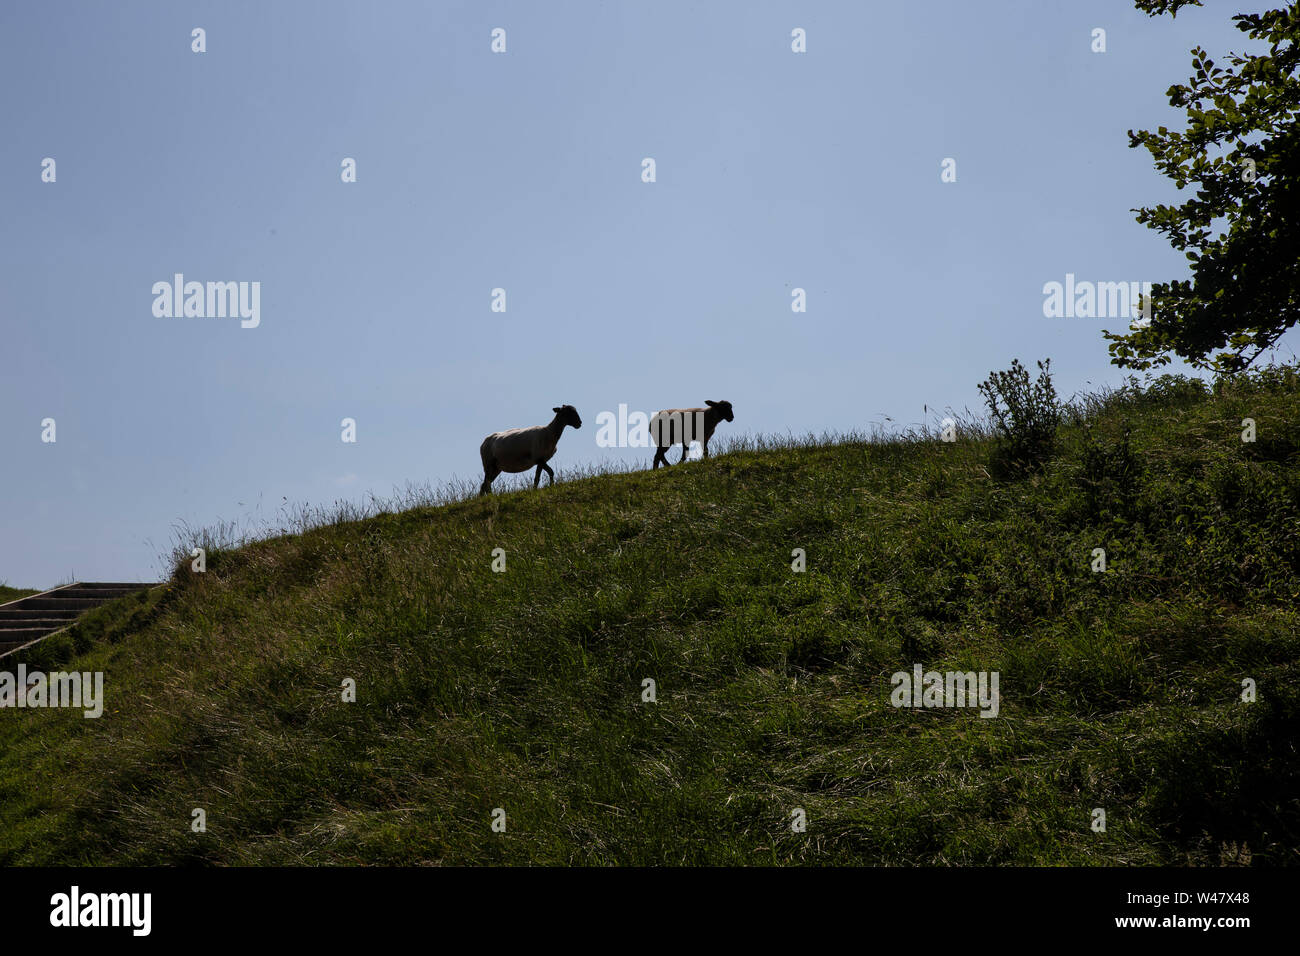 Two sheep Ovis aries on the brow of a grassy hill silhoutted against a bright sky Stock Photo